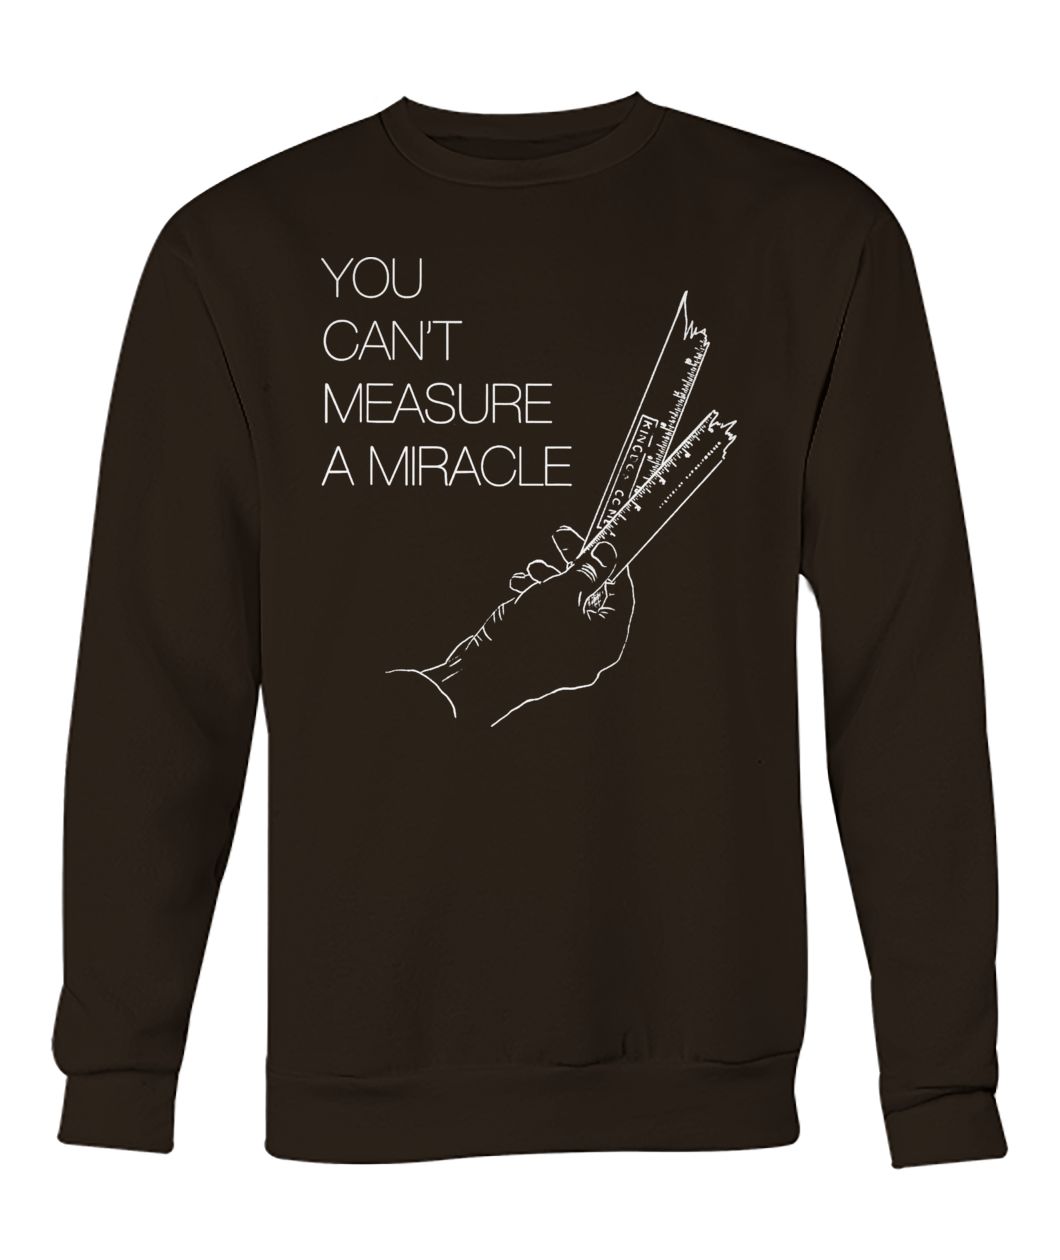 You can't measure a miracle crew neck sweatshirt